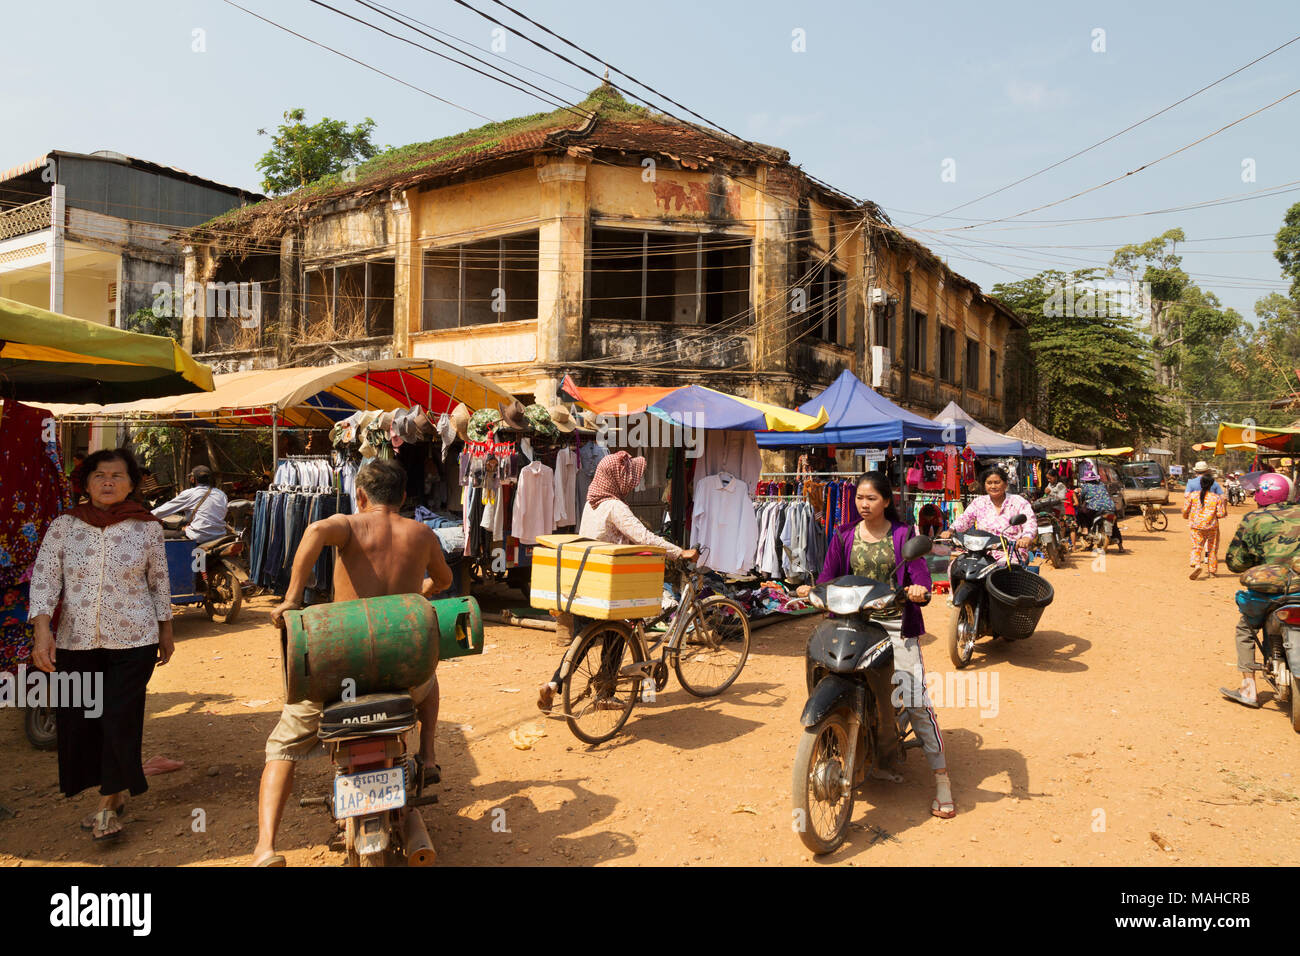 Cambodia market, Chhlong market, - market stalls and old colonial French buildings, Chhlong town, Kratie province, Cambodia Asia Stock Photo